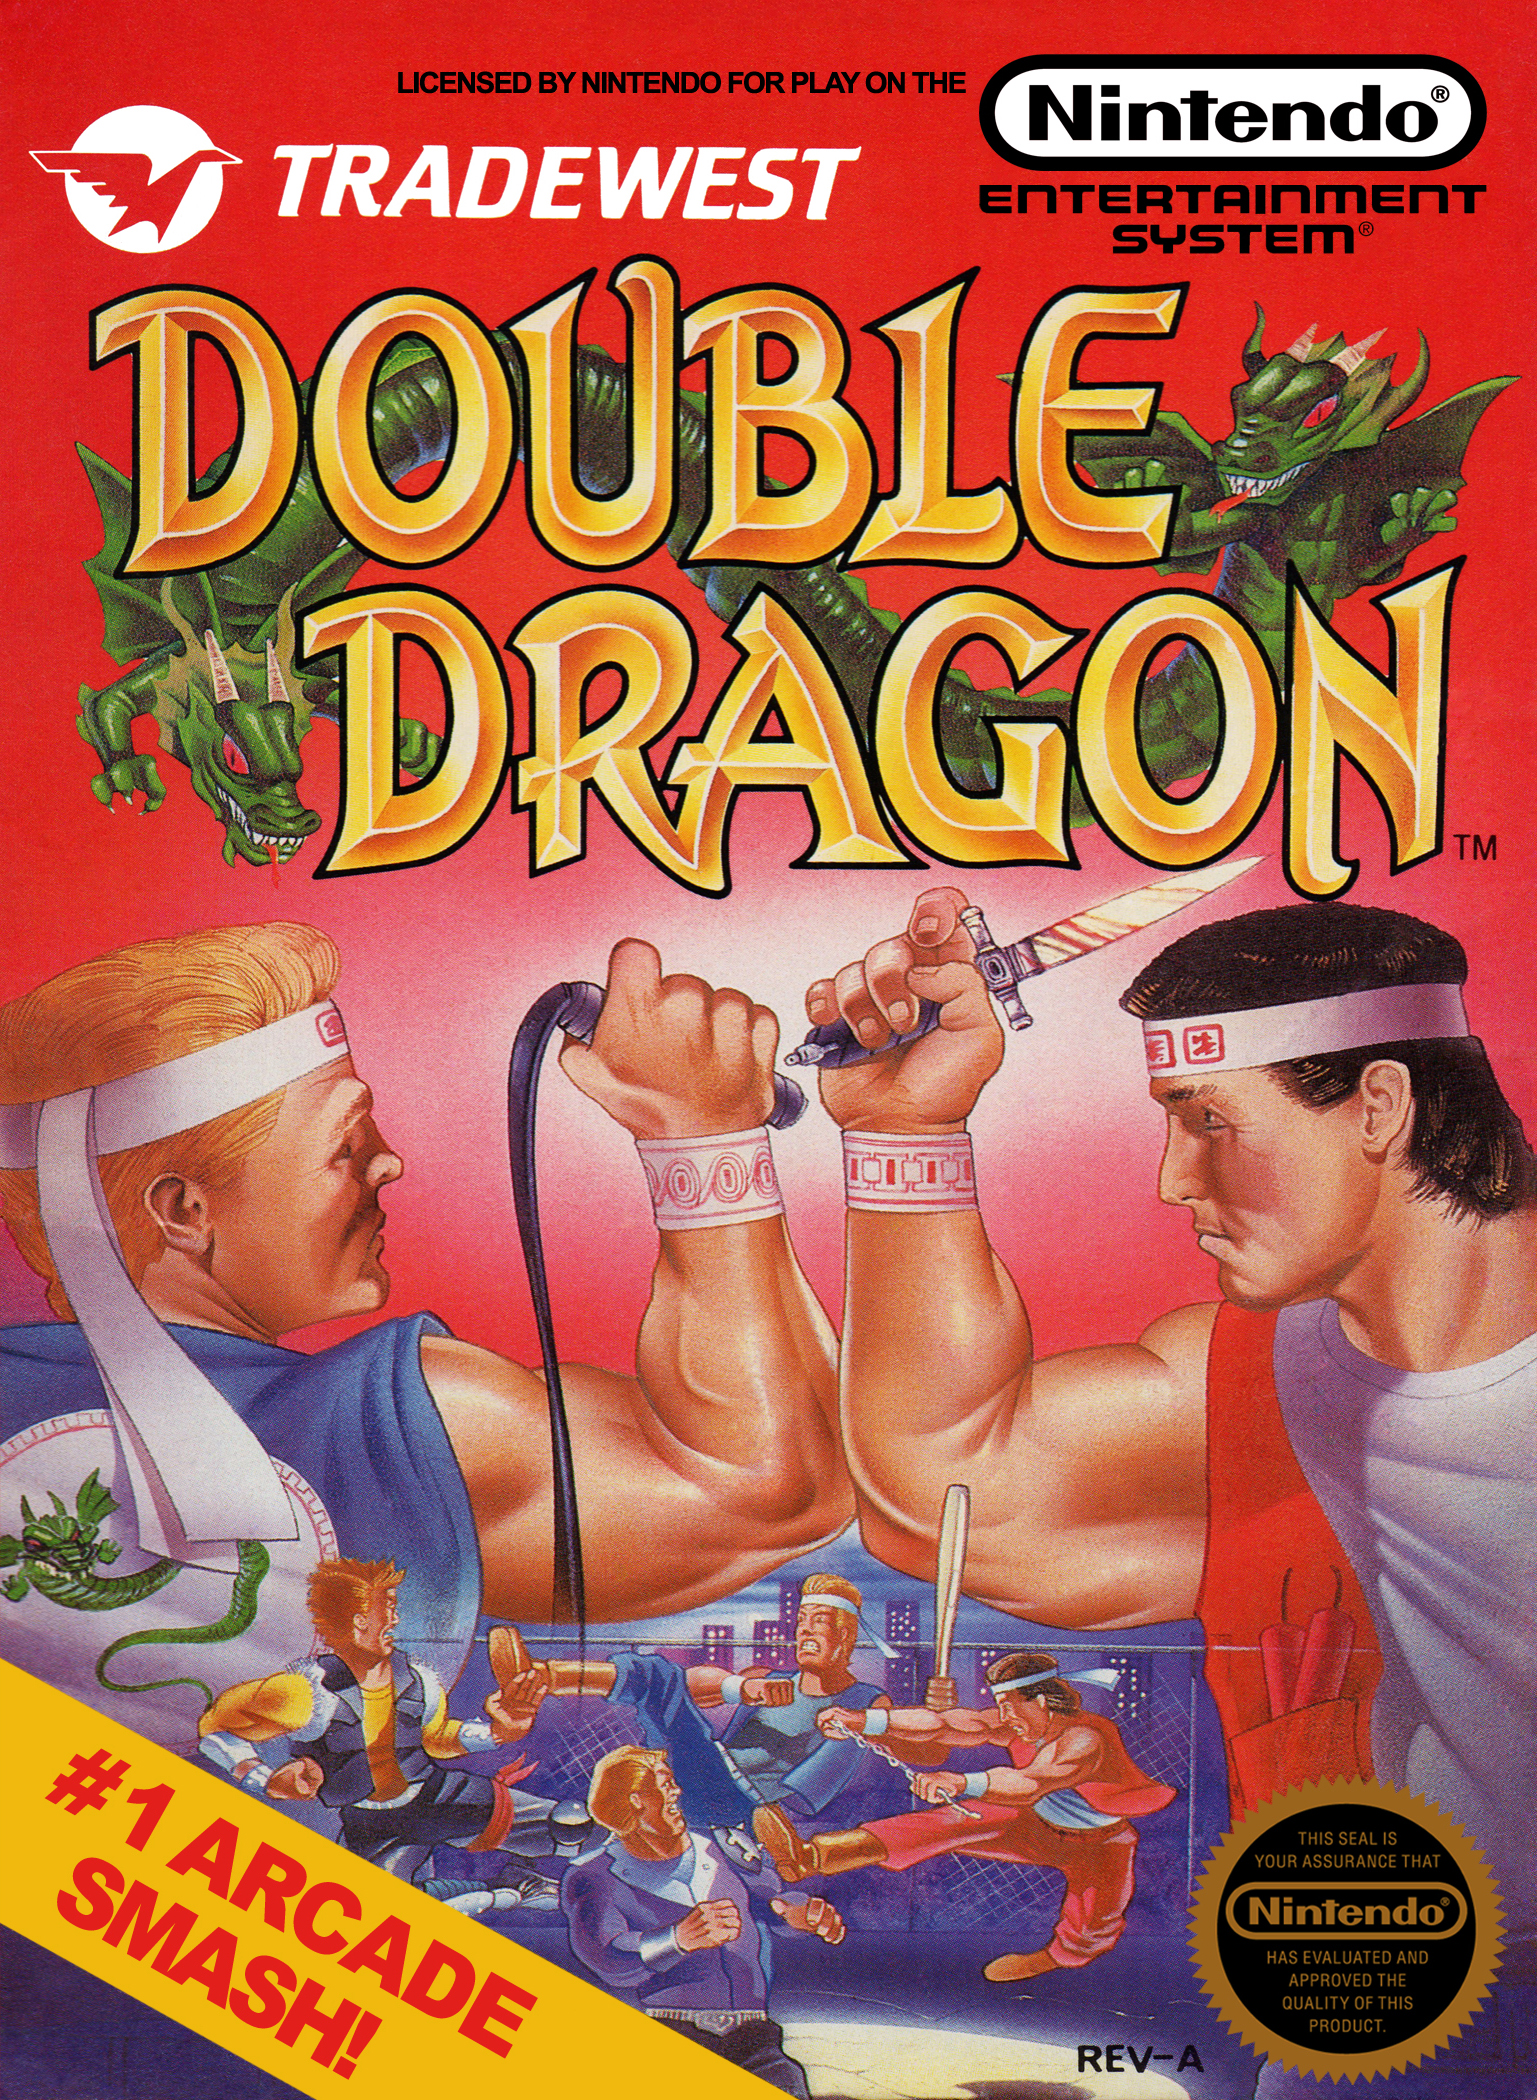 Nintendo Switch Game Double Dragon Collection (MULTI